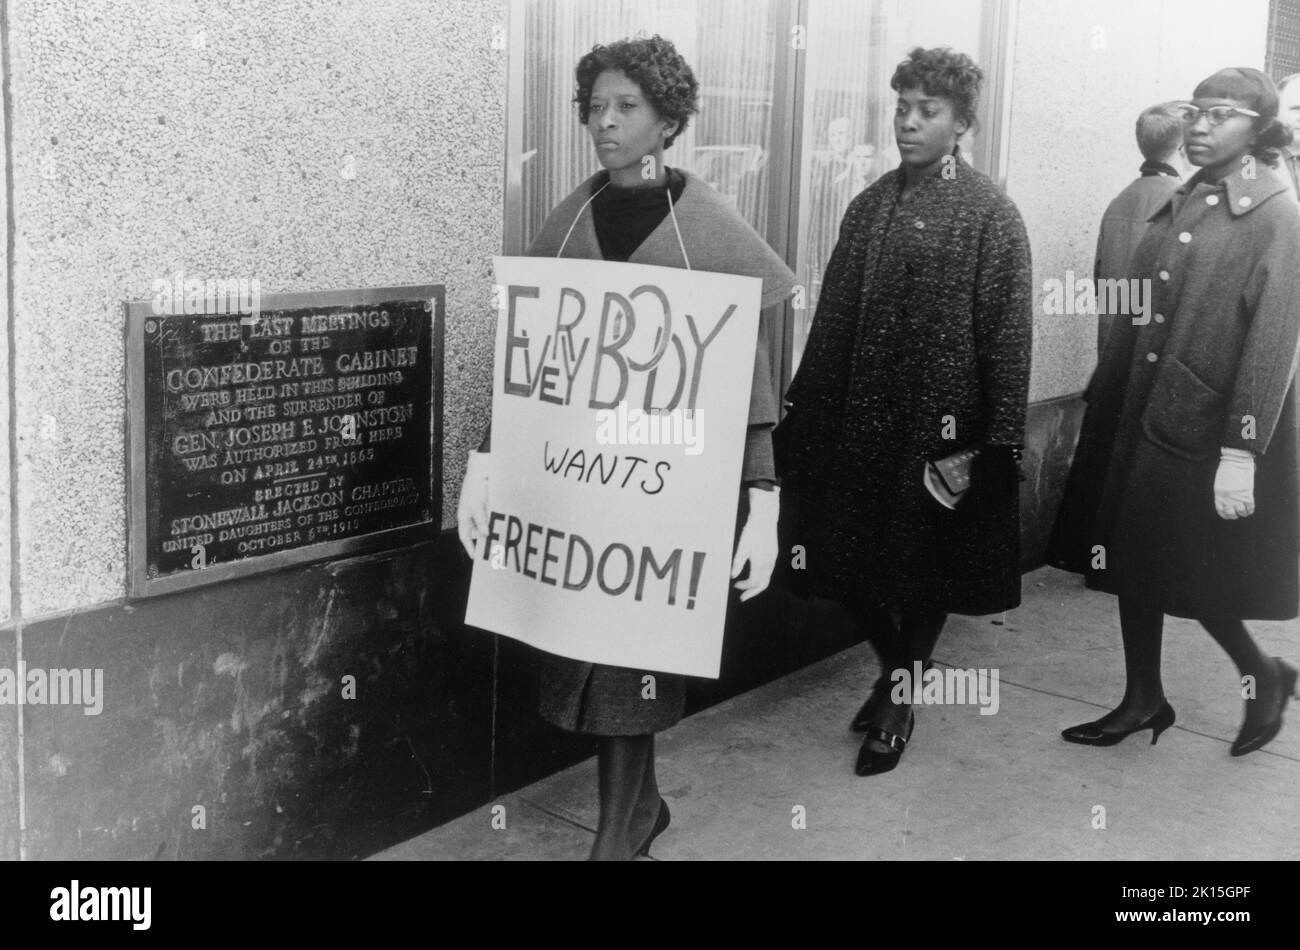 Protesting segregation, these demonstrators walked past this Charlotte, NC building where the last meeting of the Confederate cabinet was held. The demonstrators are protesting that a movie theater in this building would only seat African Americans in the balcony; February, 1960. Stock Photo